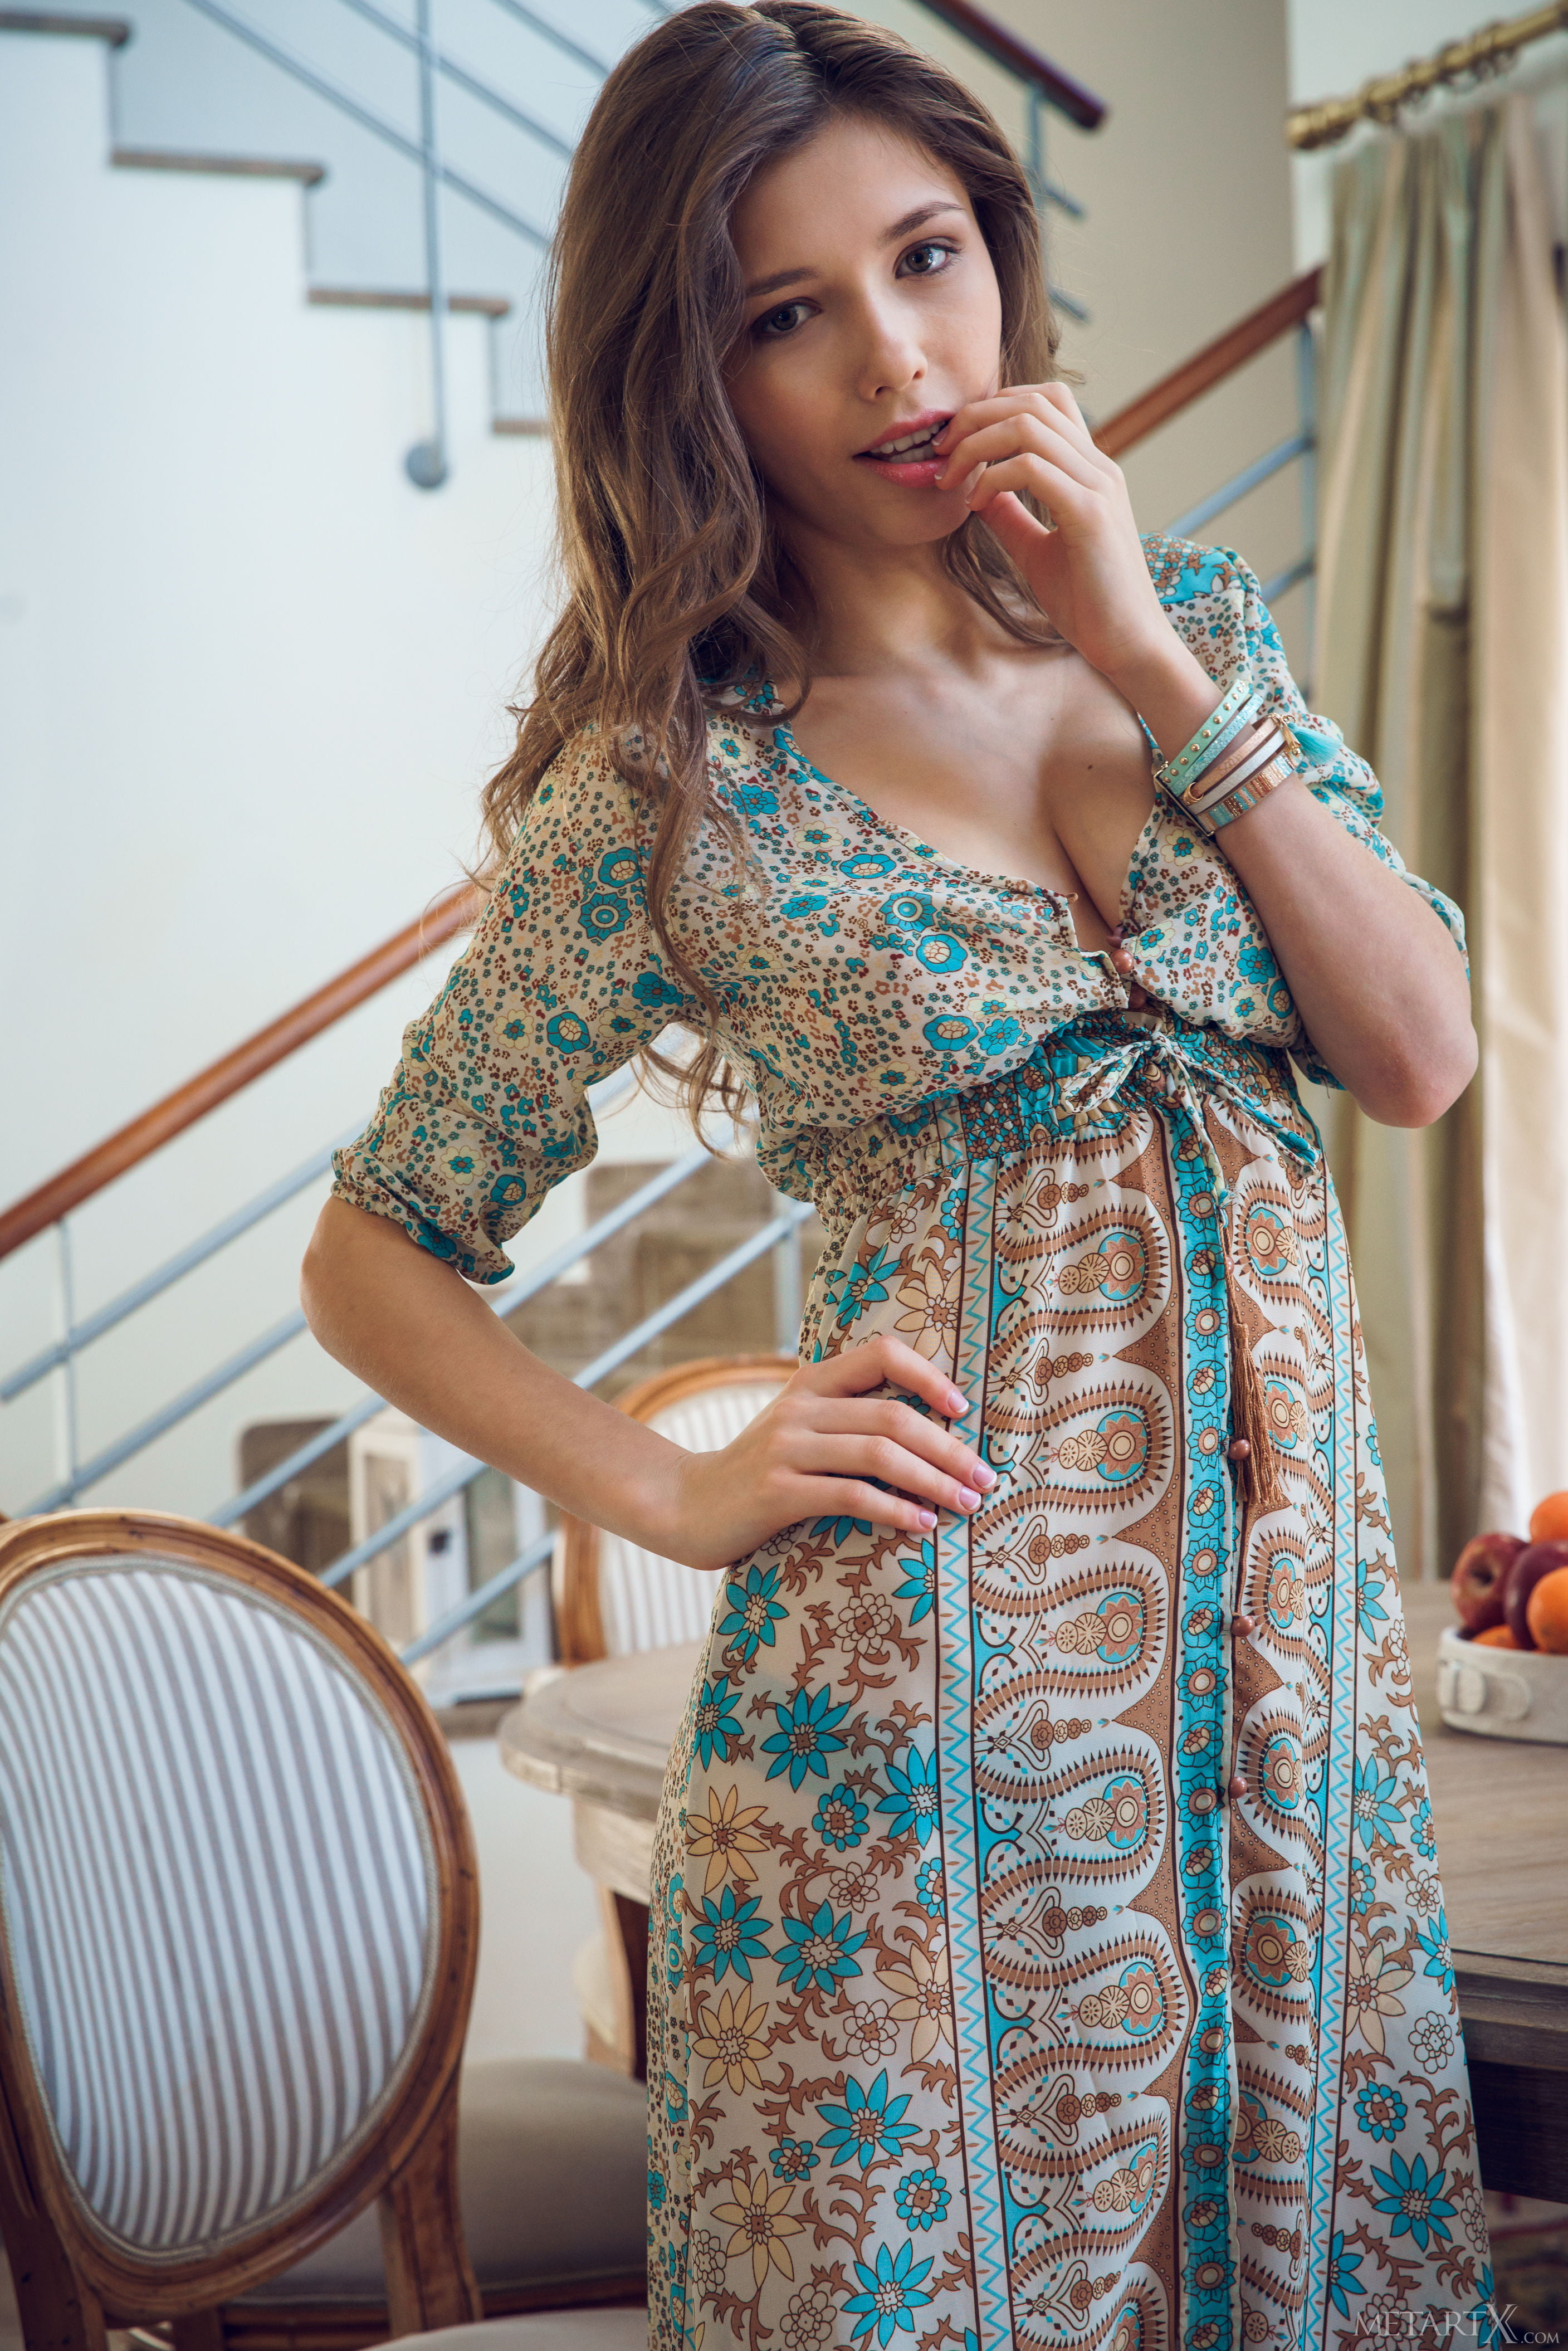 women's teal and gray elbow-sleeved dress, Mila Azul, model, beautiful woman